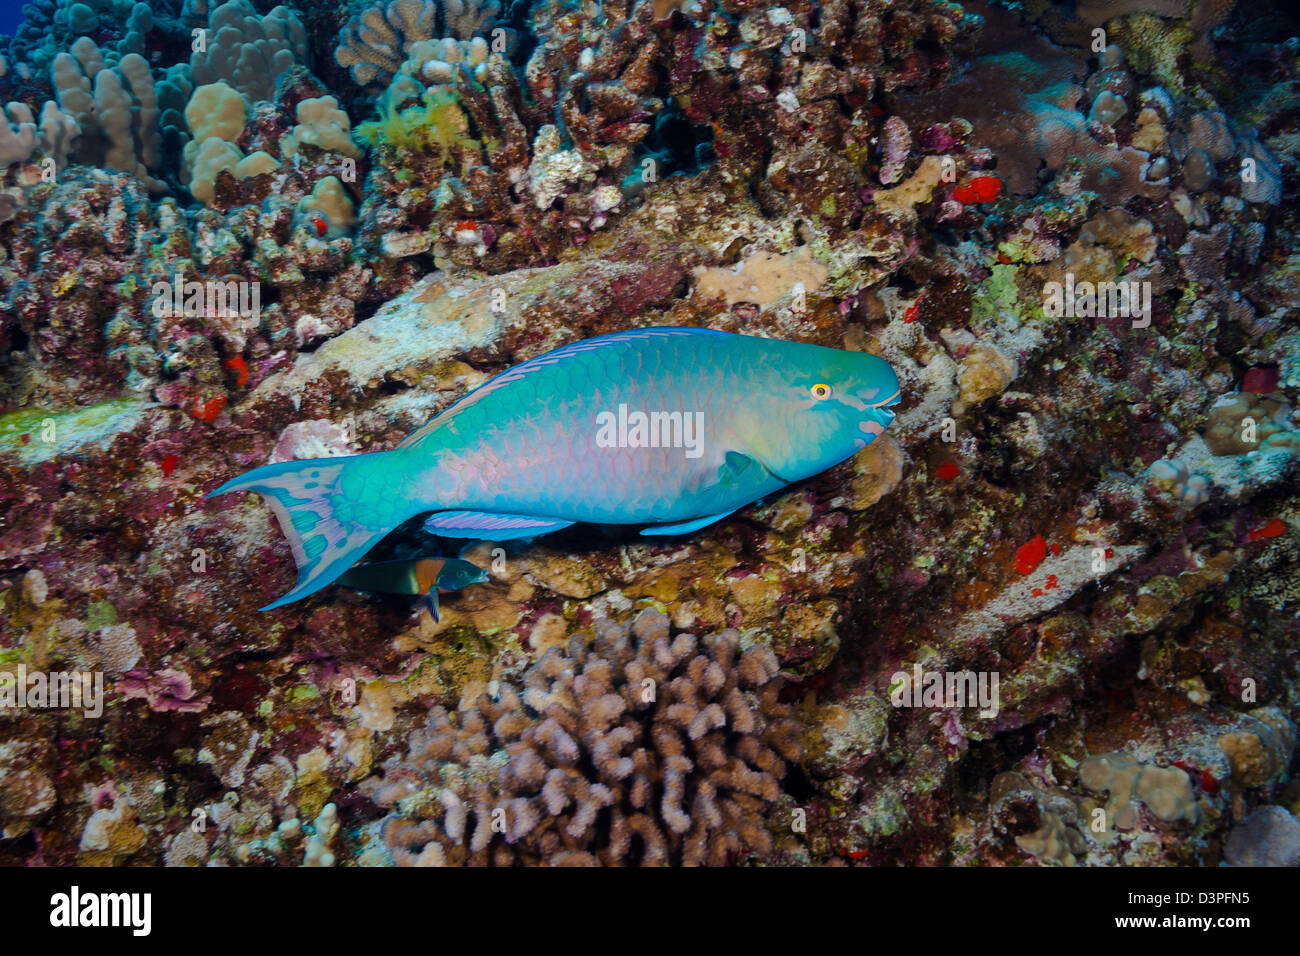 The terminal or final phase of a supermale ember parrotfish, Scarus rubroviolaceus, Hawaii. Stock Photo